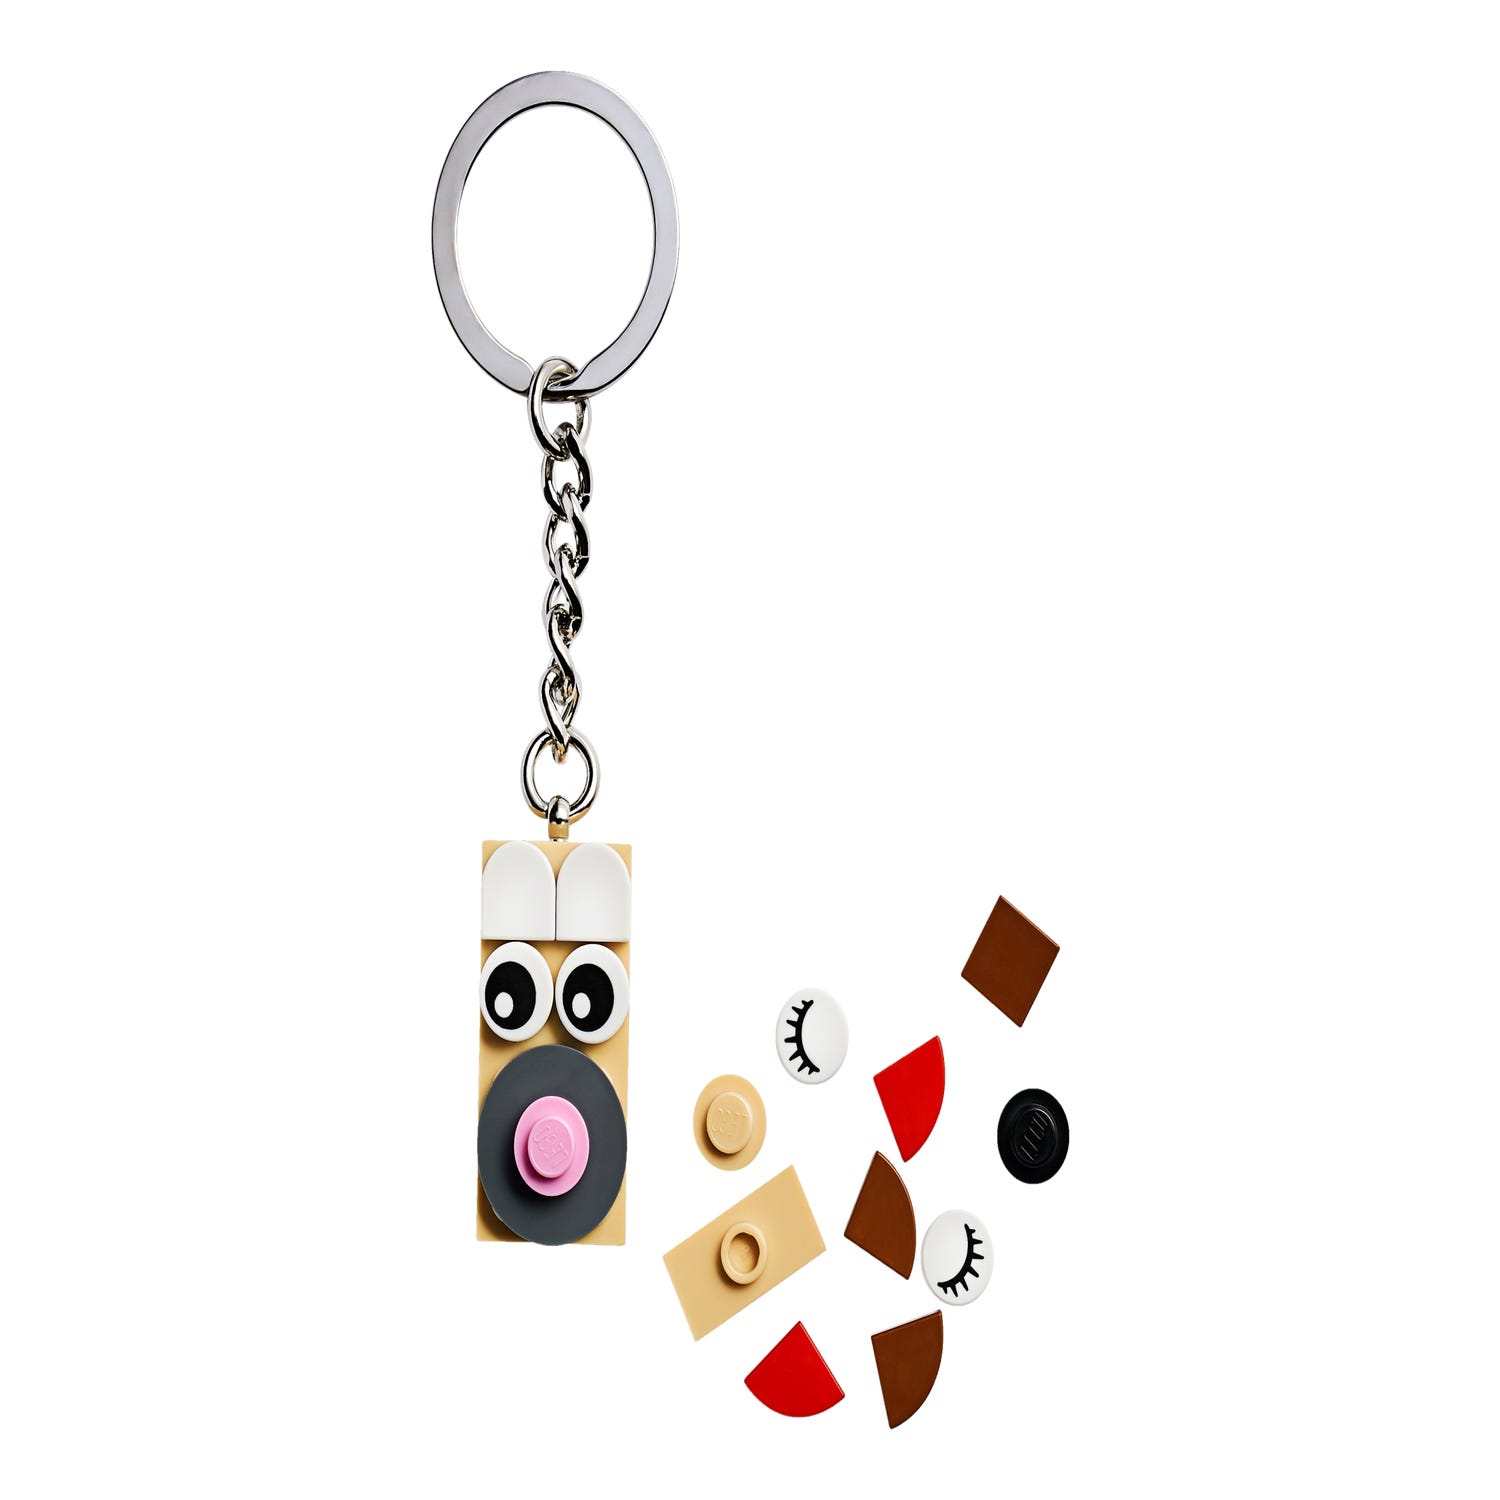 luc8k-co Bag Charms - Limited Edition Handcrafted Bead Bag Charm & Keychain. 83 of 88